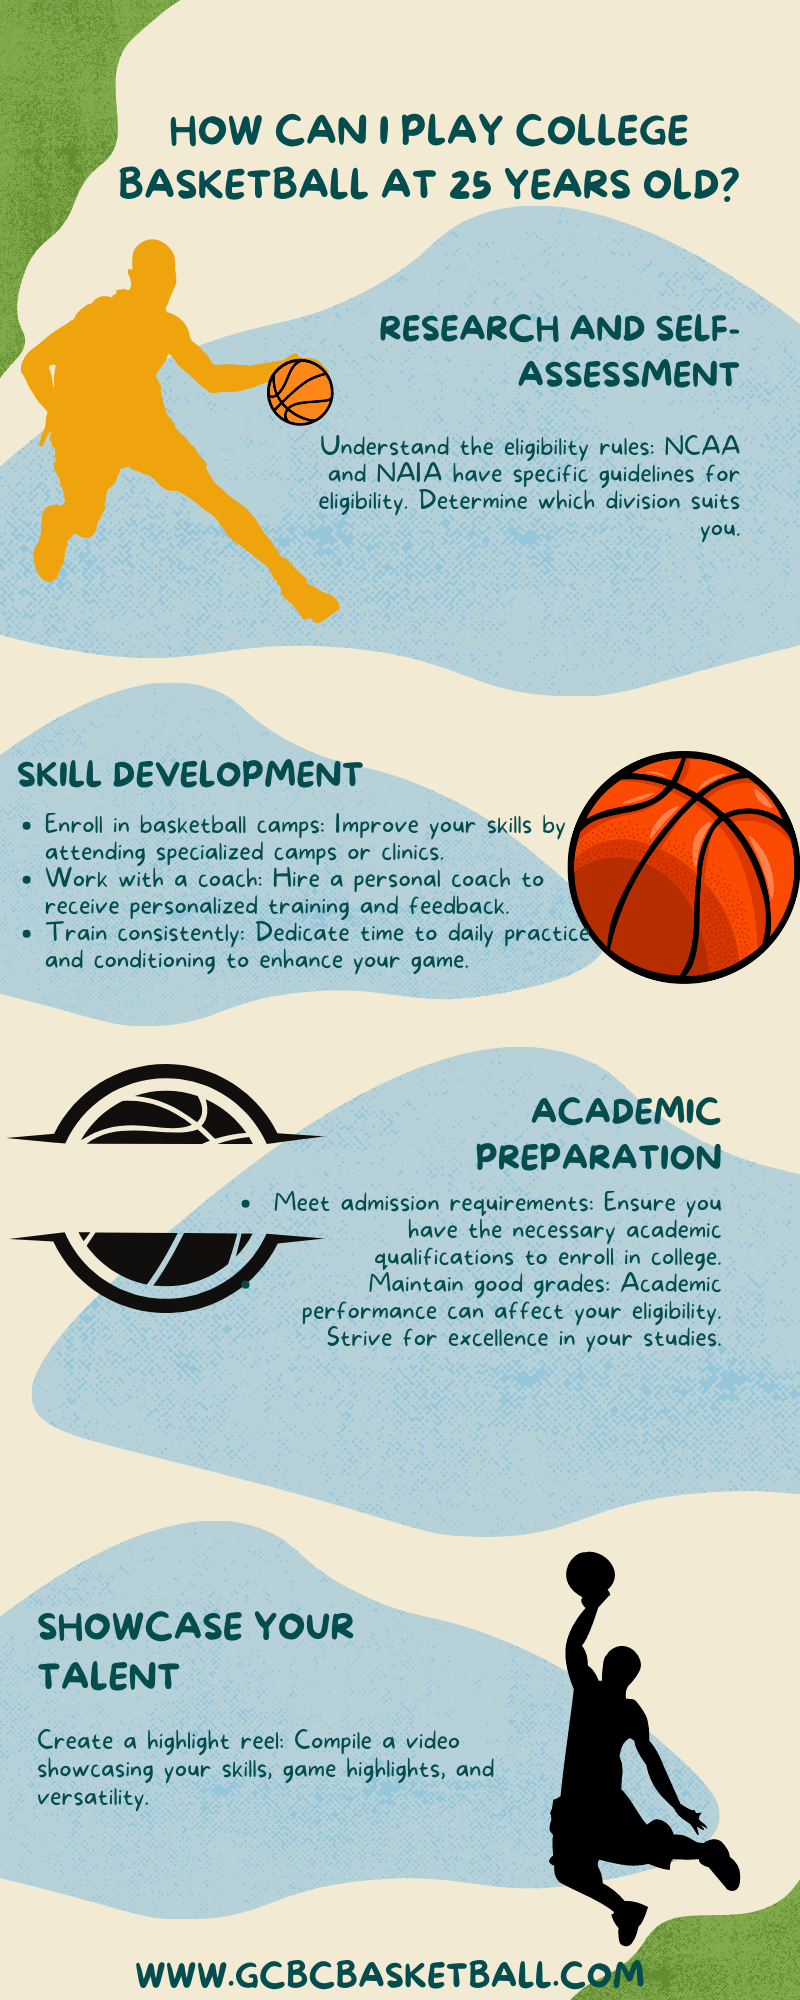 _How Can I Play College Basketball At 25 Years Old-Infographic